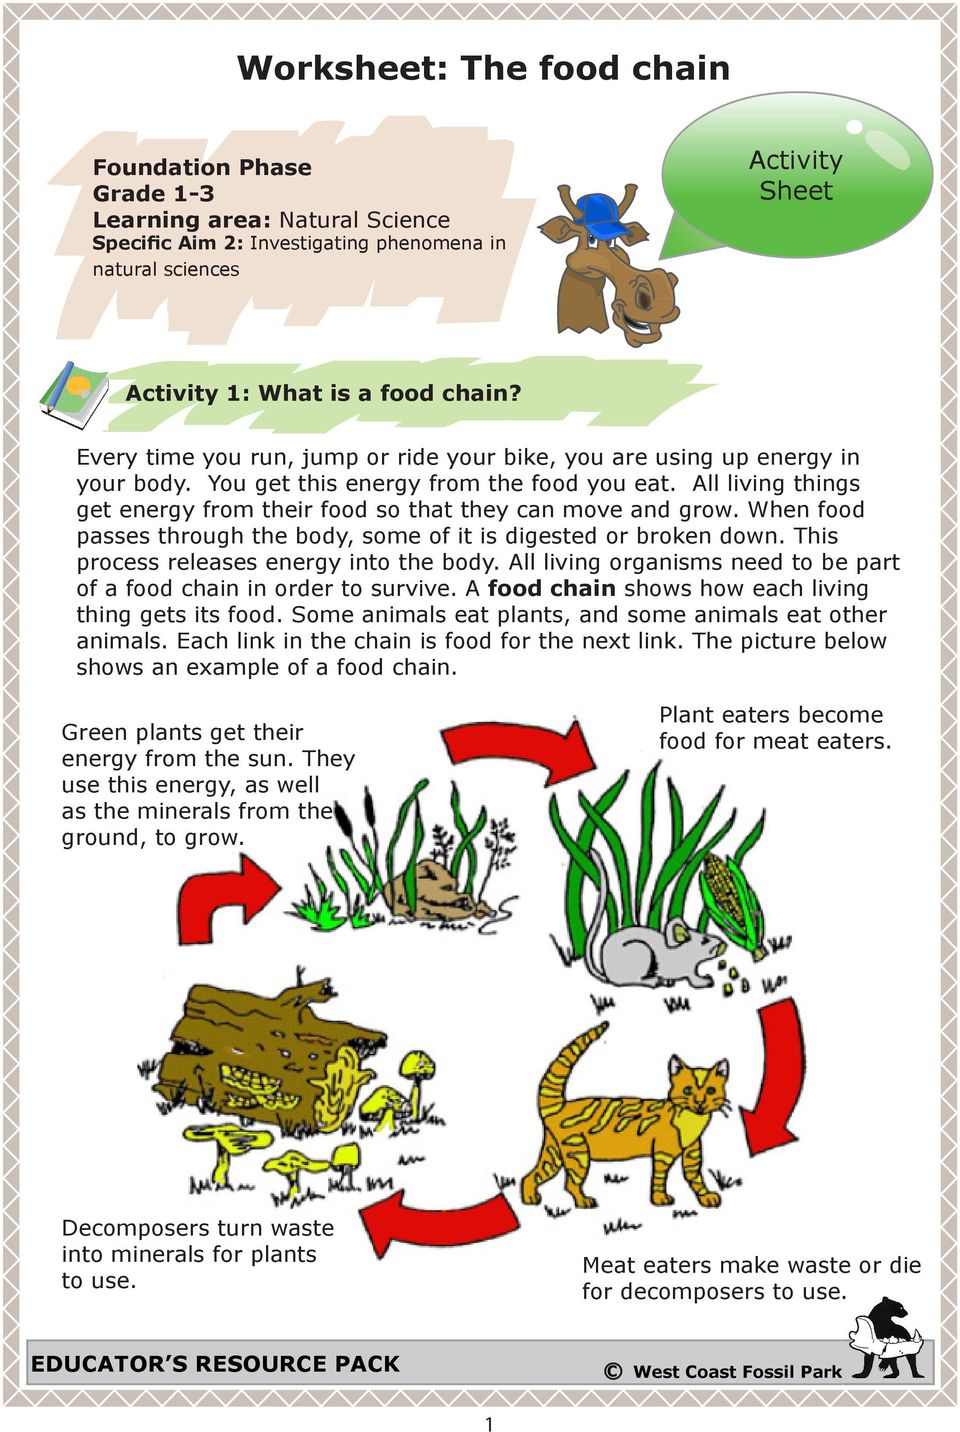 Worksheet: The food chain - PDF Free Download Inside Food Chain Worksheet Pdf